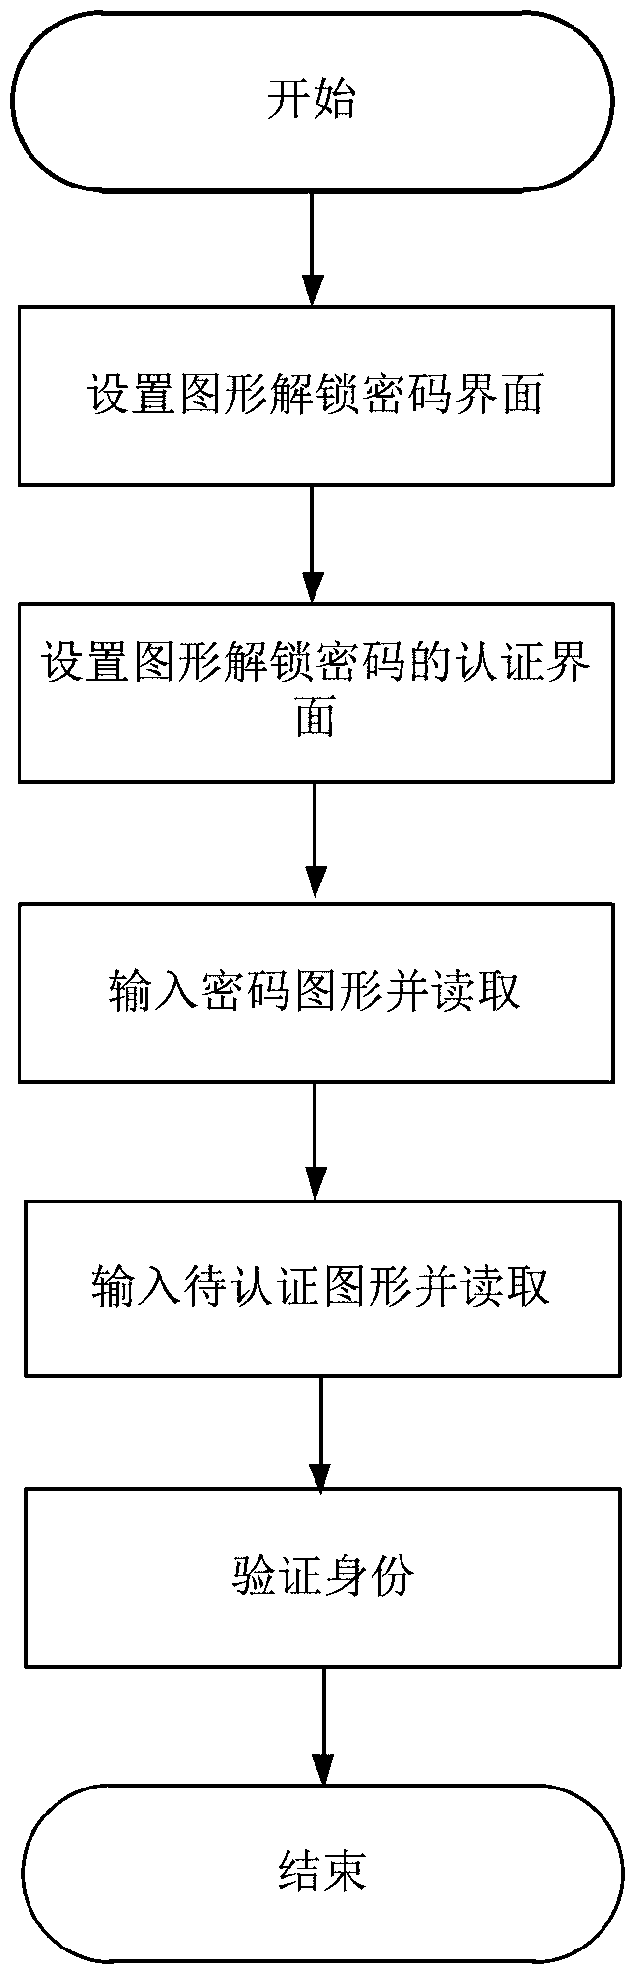 Identity authentication improvement method for graphic unlocking password in Android system